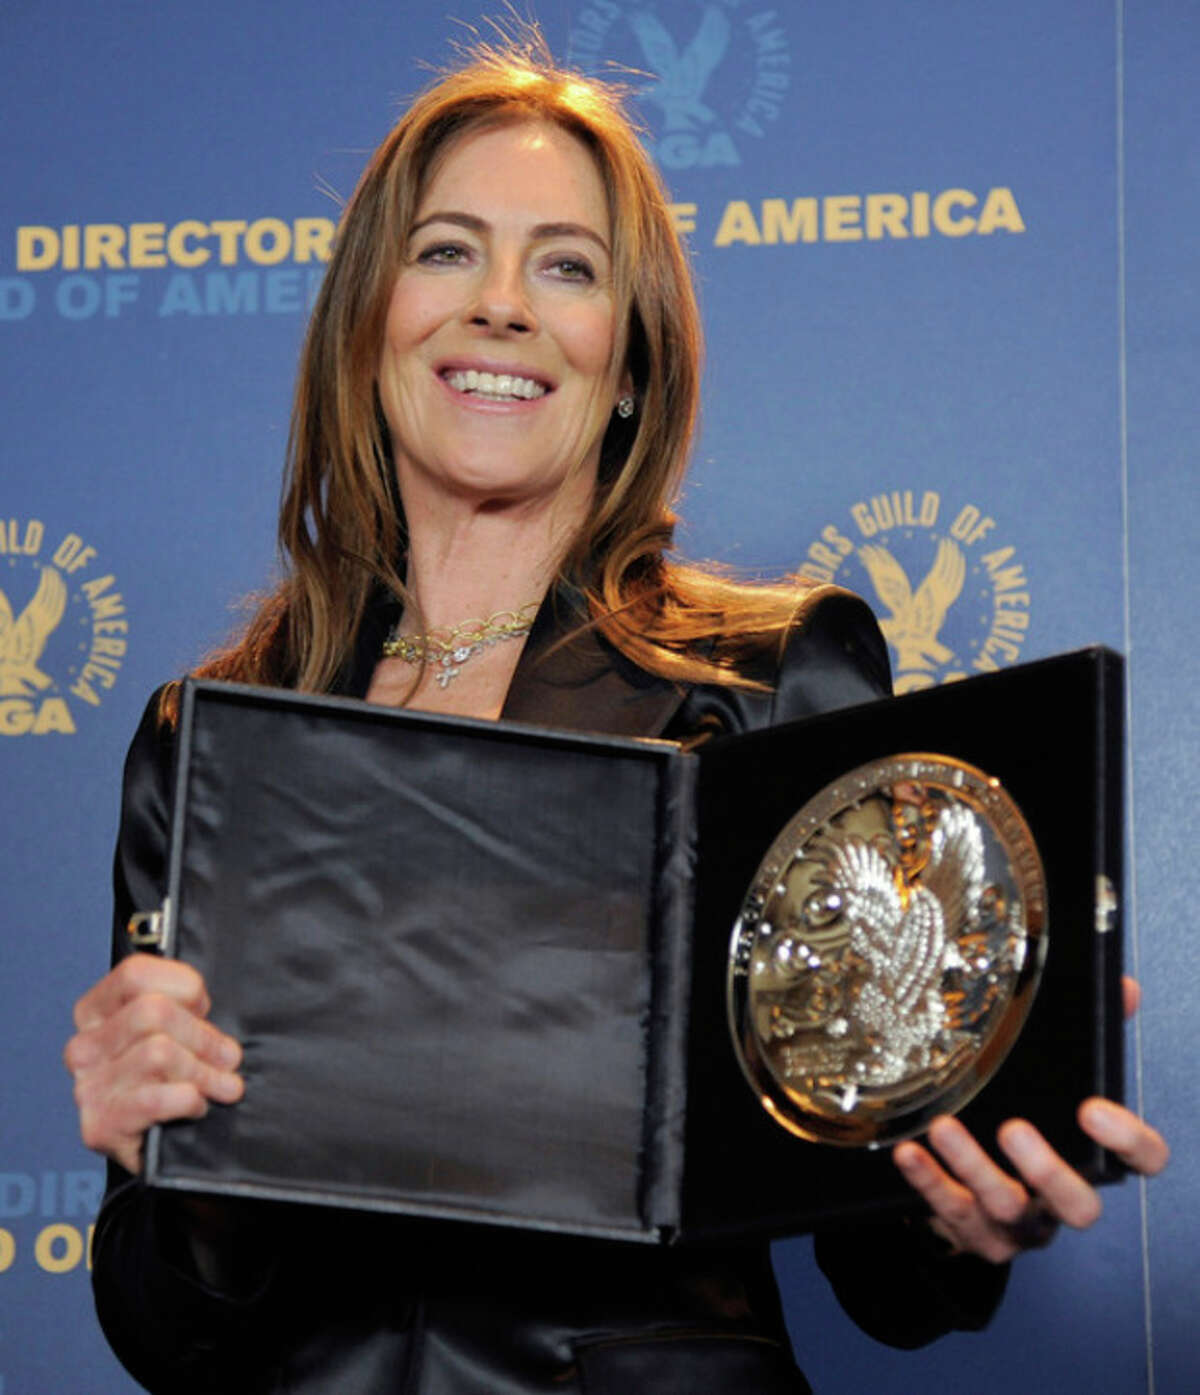 Kathryn Bigelow poses backstage with her feature film nomination plaque for "Zero Dark Thirty" at the 65th Annual Directors Guild of America Awards at the Ray Dolby Ballroom on Saturday, Feb. 2, 2013, in Los Angeles. (Photo by Chris Pizzello/Invision/AP)